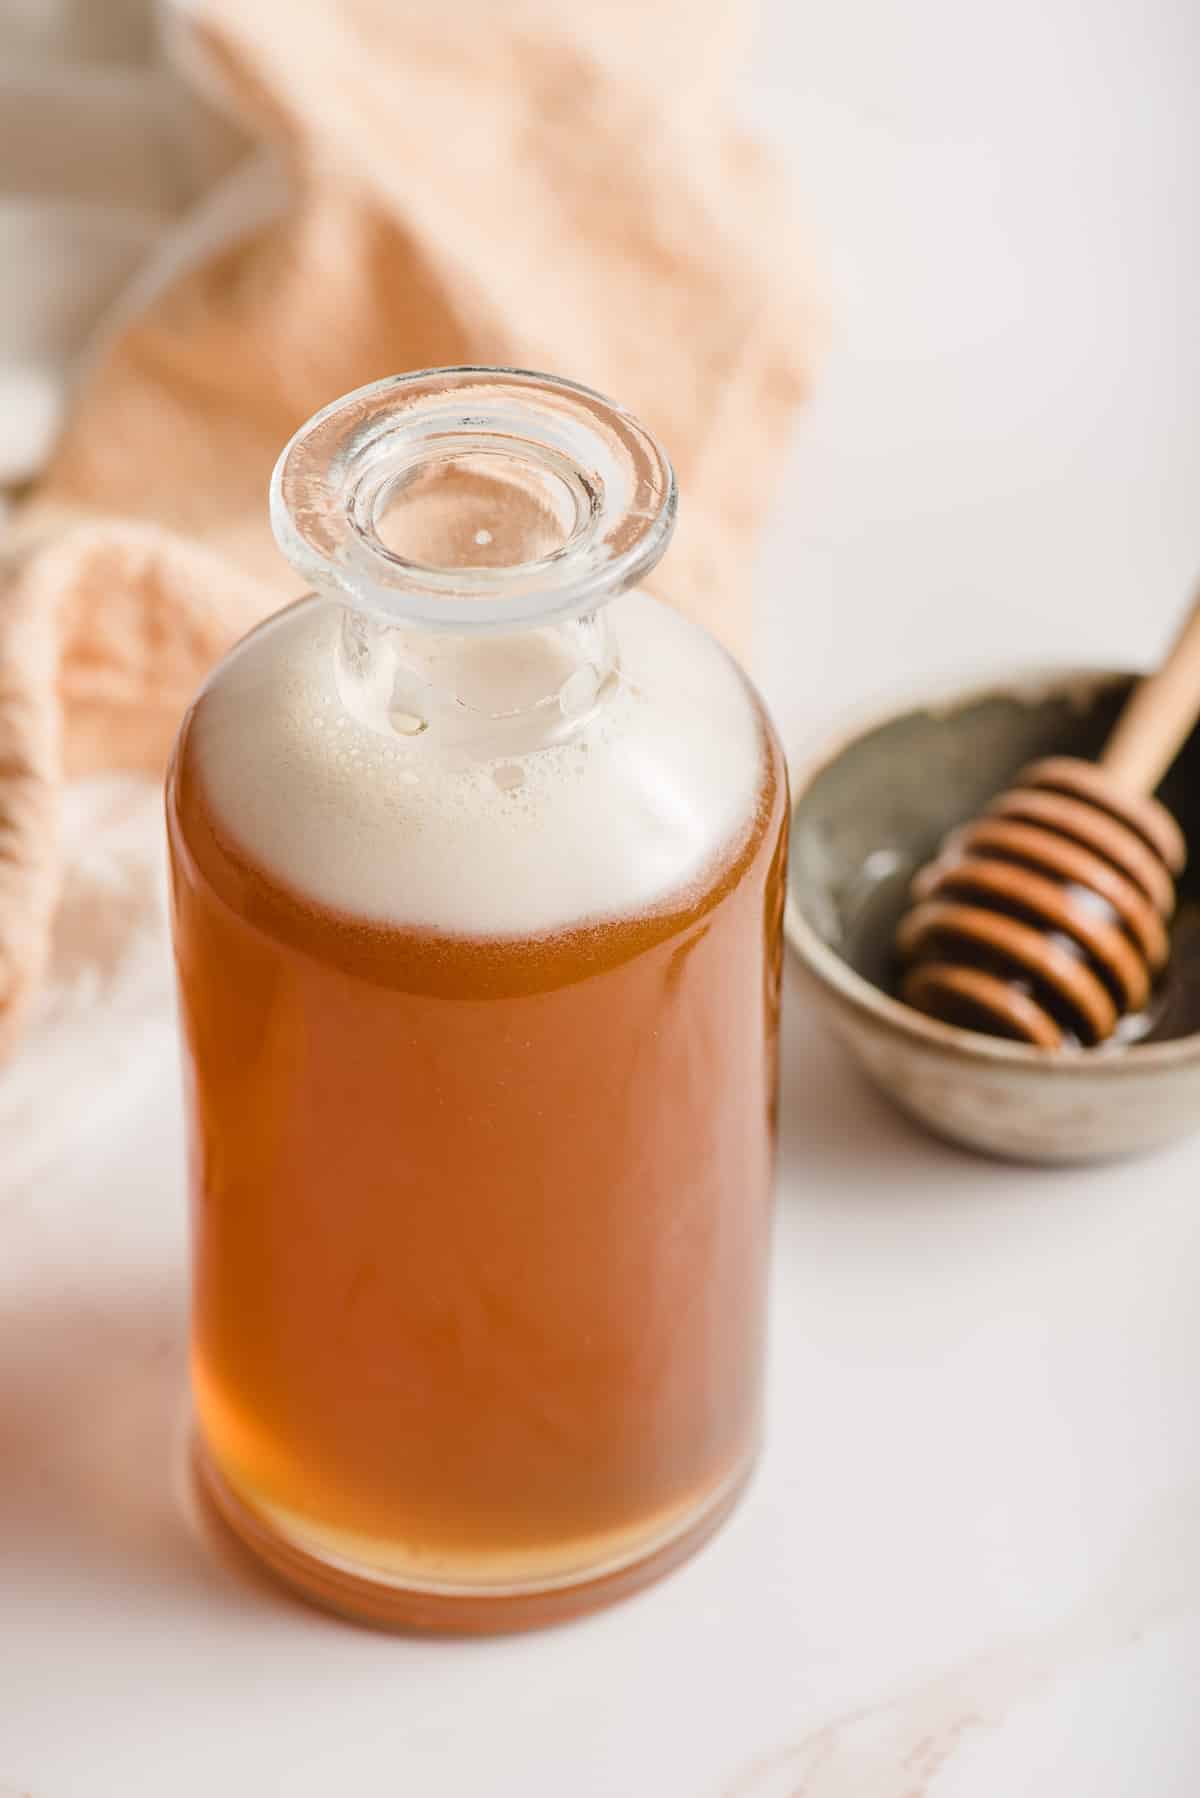 Honey simple syrup in a glass container.